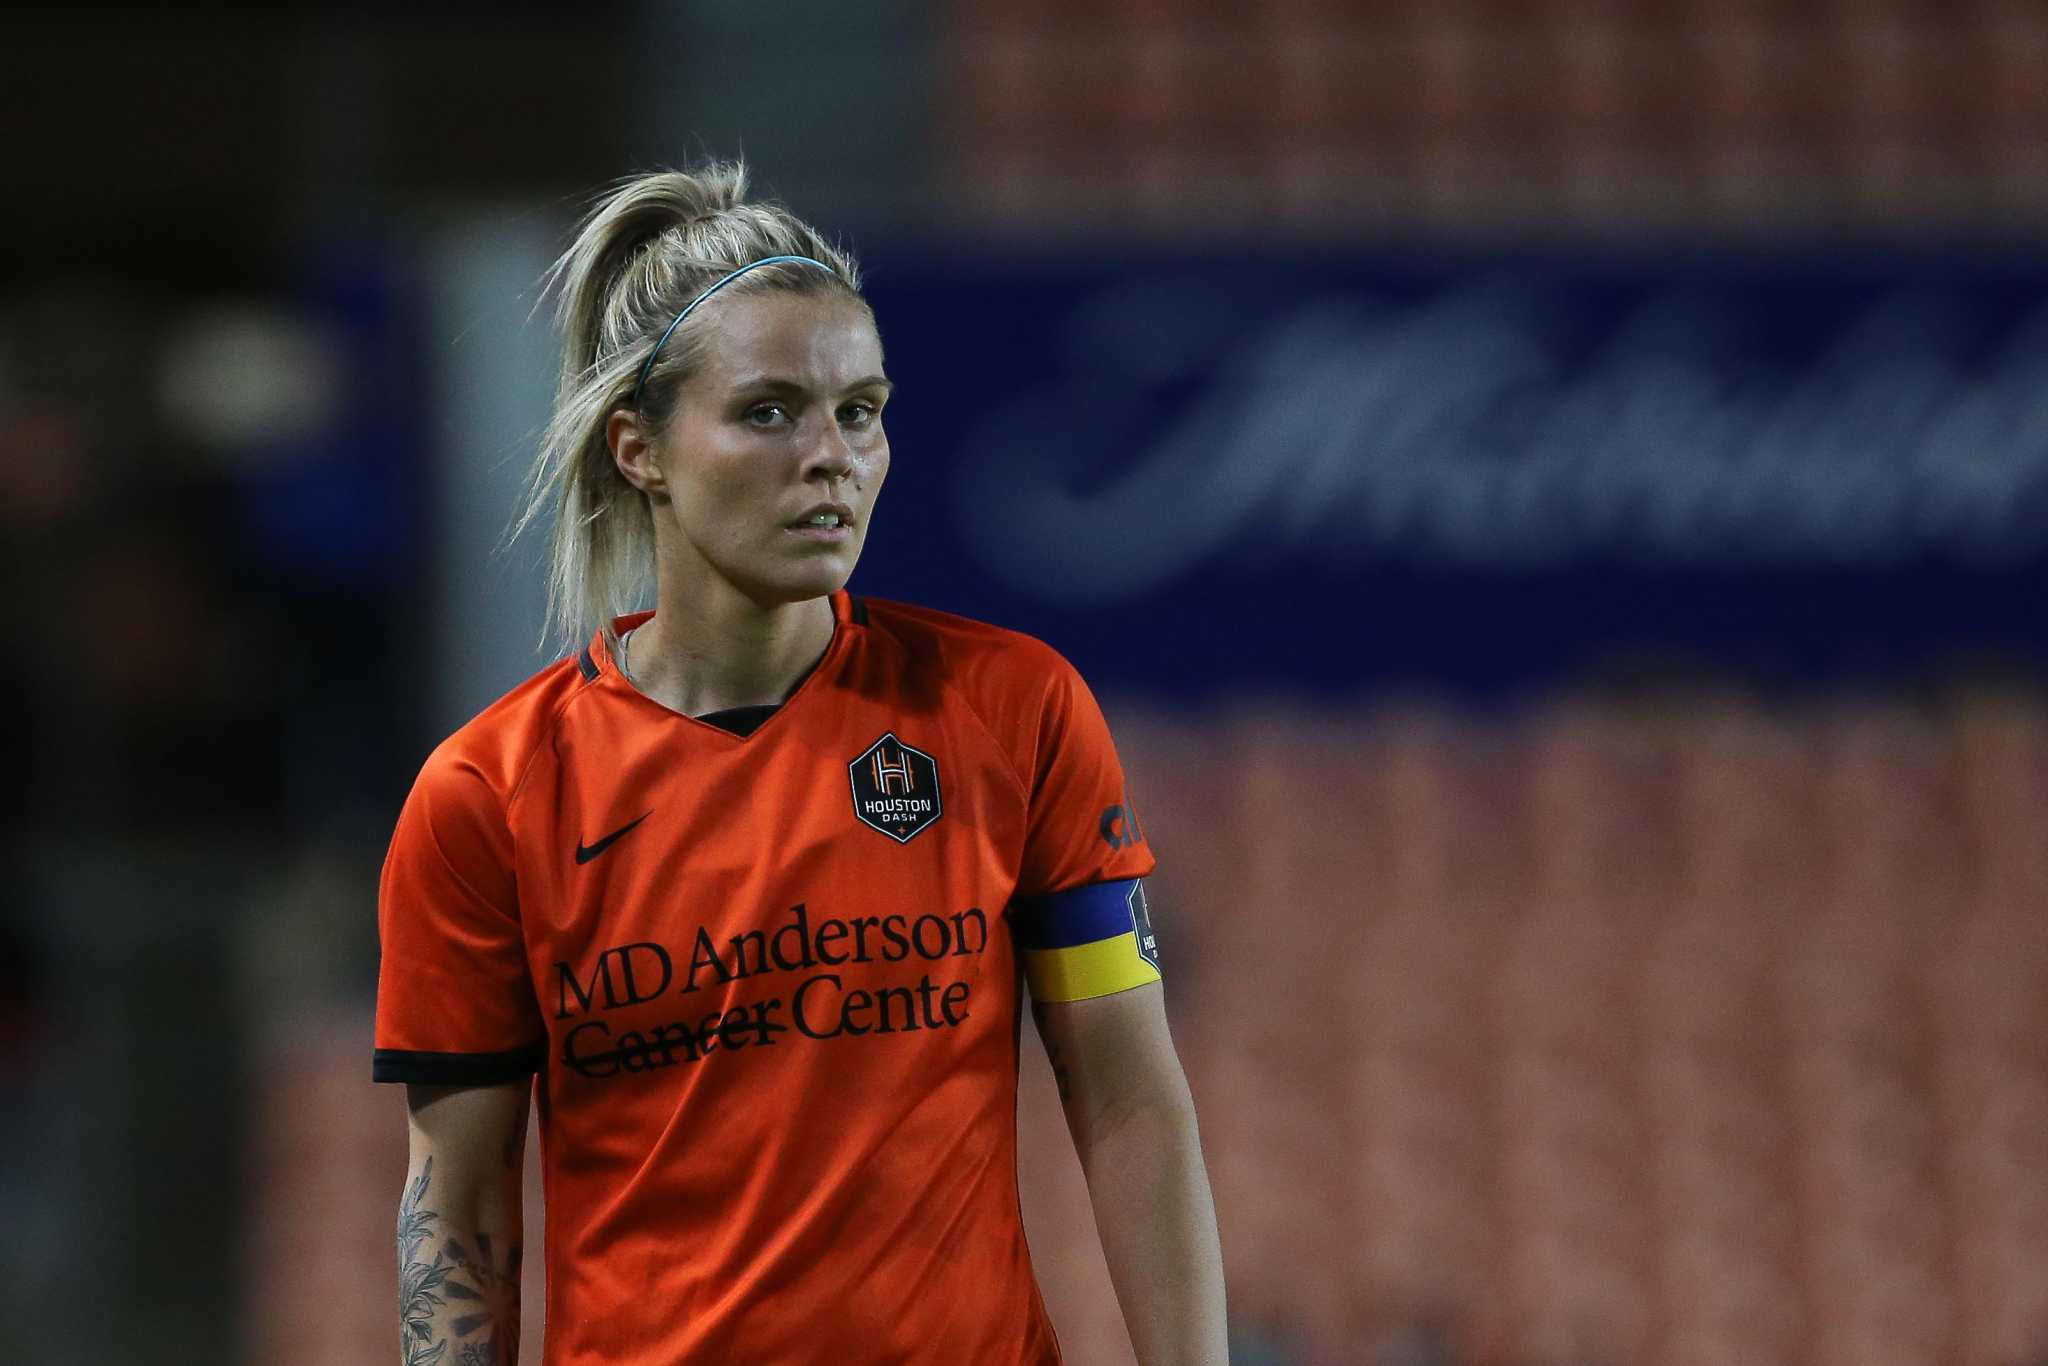 Dash captain Rachel Daly makes debut for West Ham United - Dynamo Theory